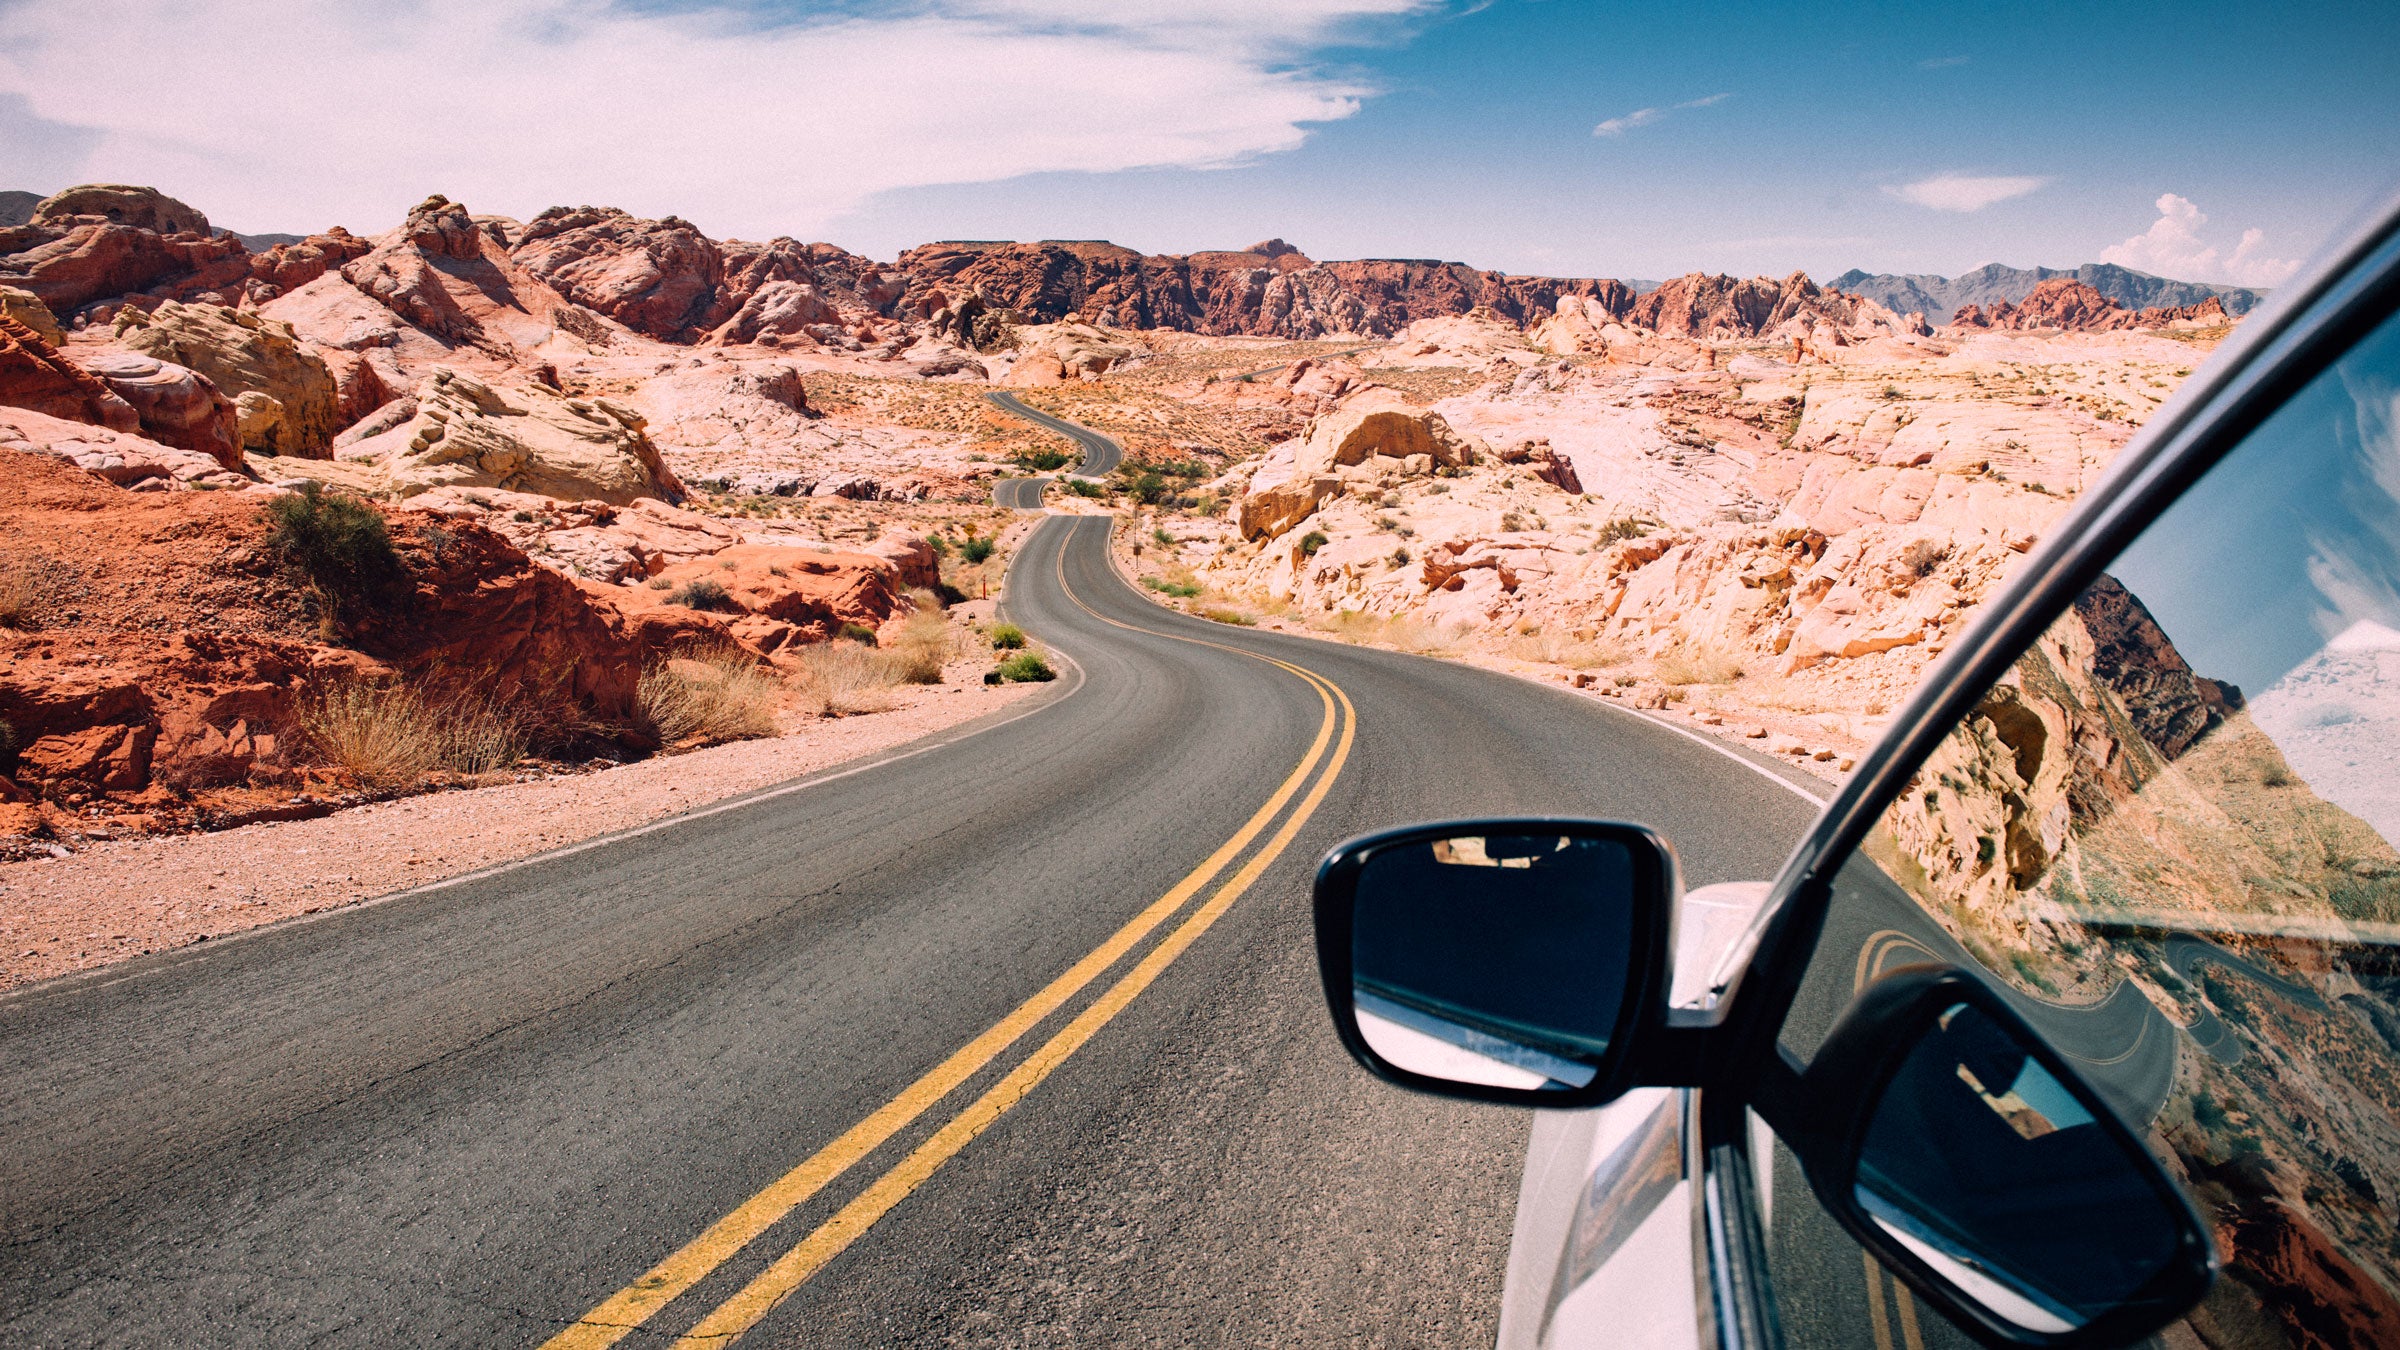 5 Accessories to Make Your Car More Adventure Ready